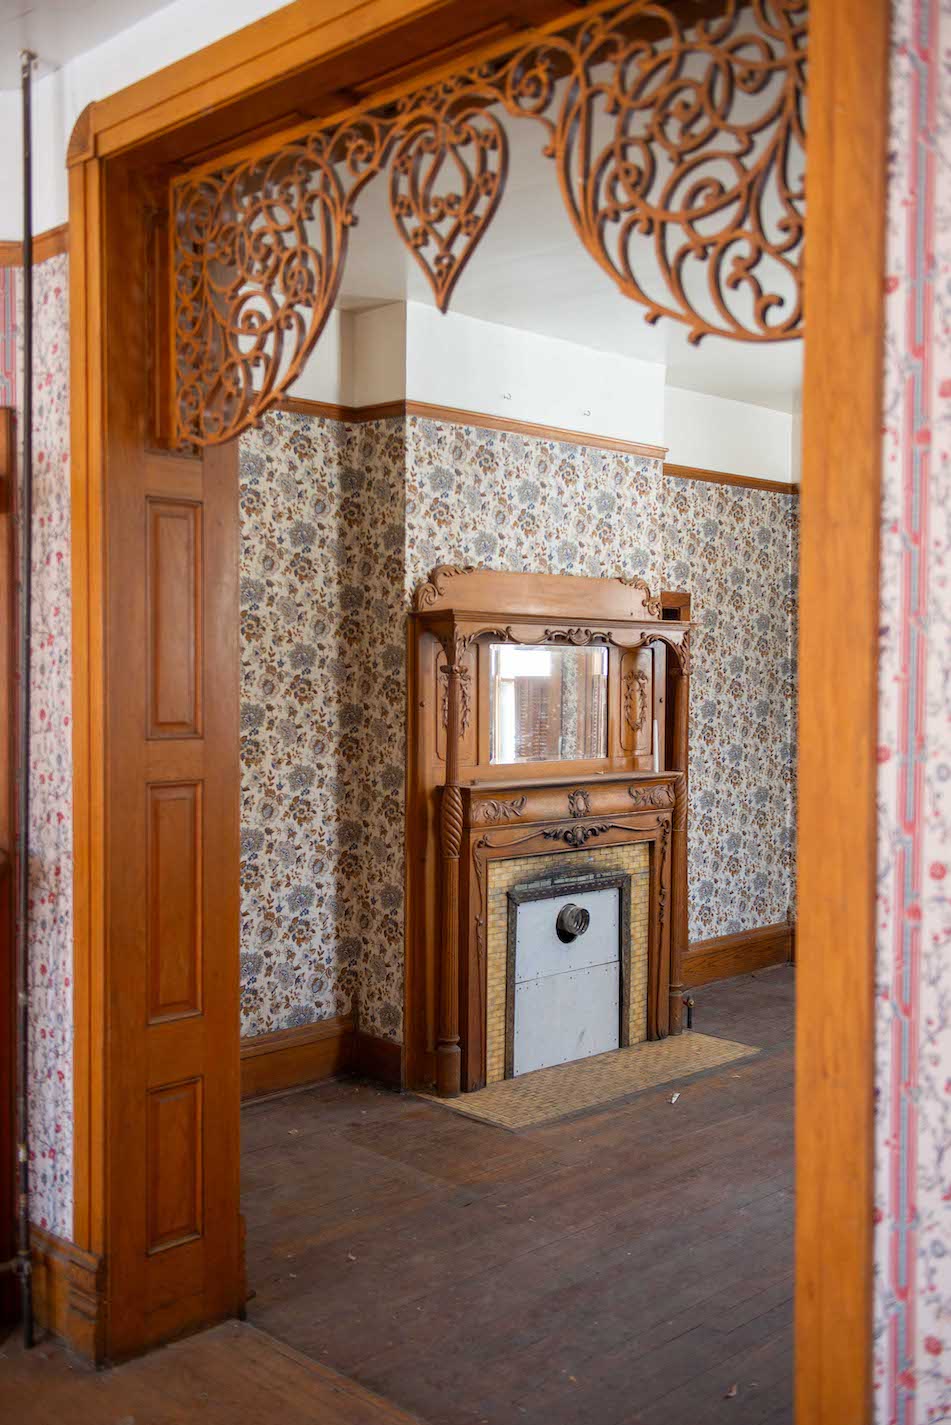 An ornate wooden doorframe framing a room a fireplace is in.